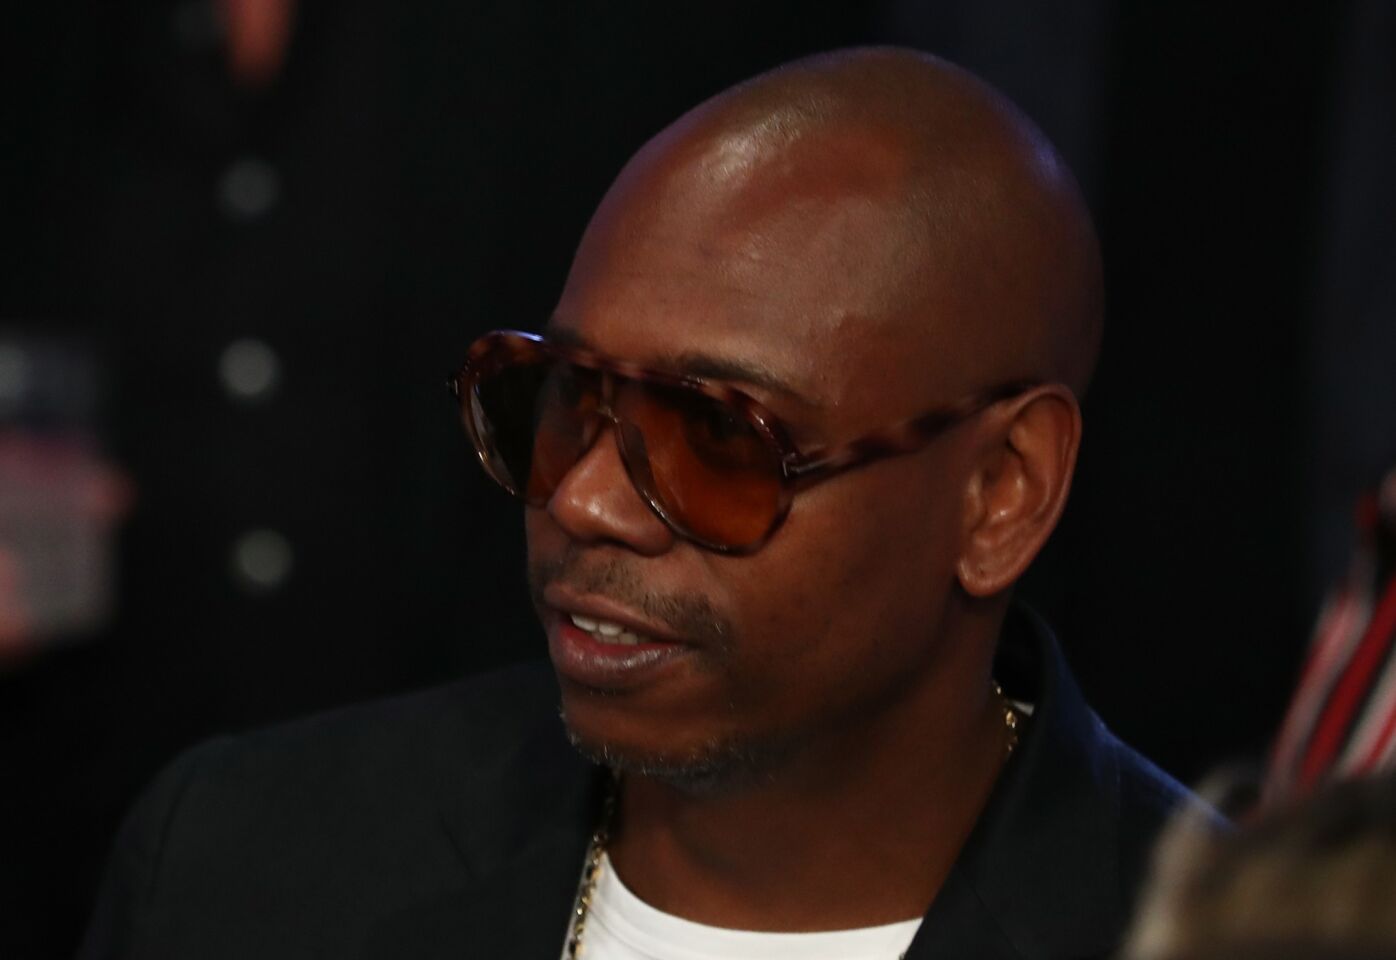 Actor/comedian Dave Chappelle is seen in attendance prior to the middleweight championship bout between Gennady Golovkin and Canelo Alvarez at T-Mobile Arena on September 15, 2018 in Las Vegas, Nevada.